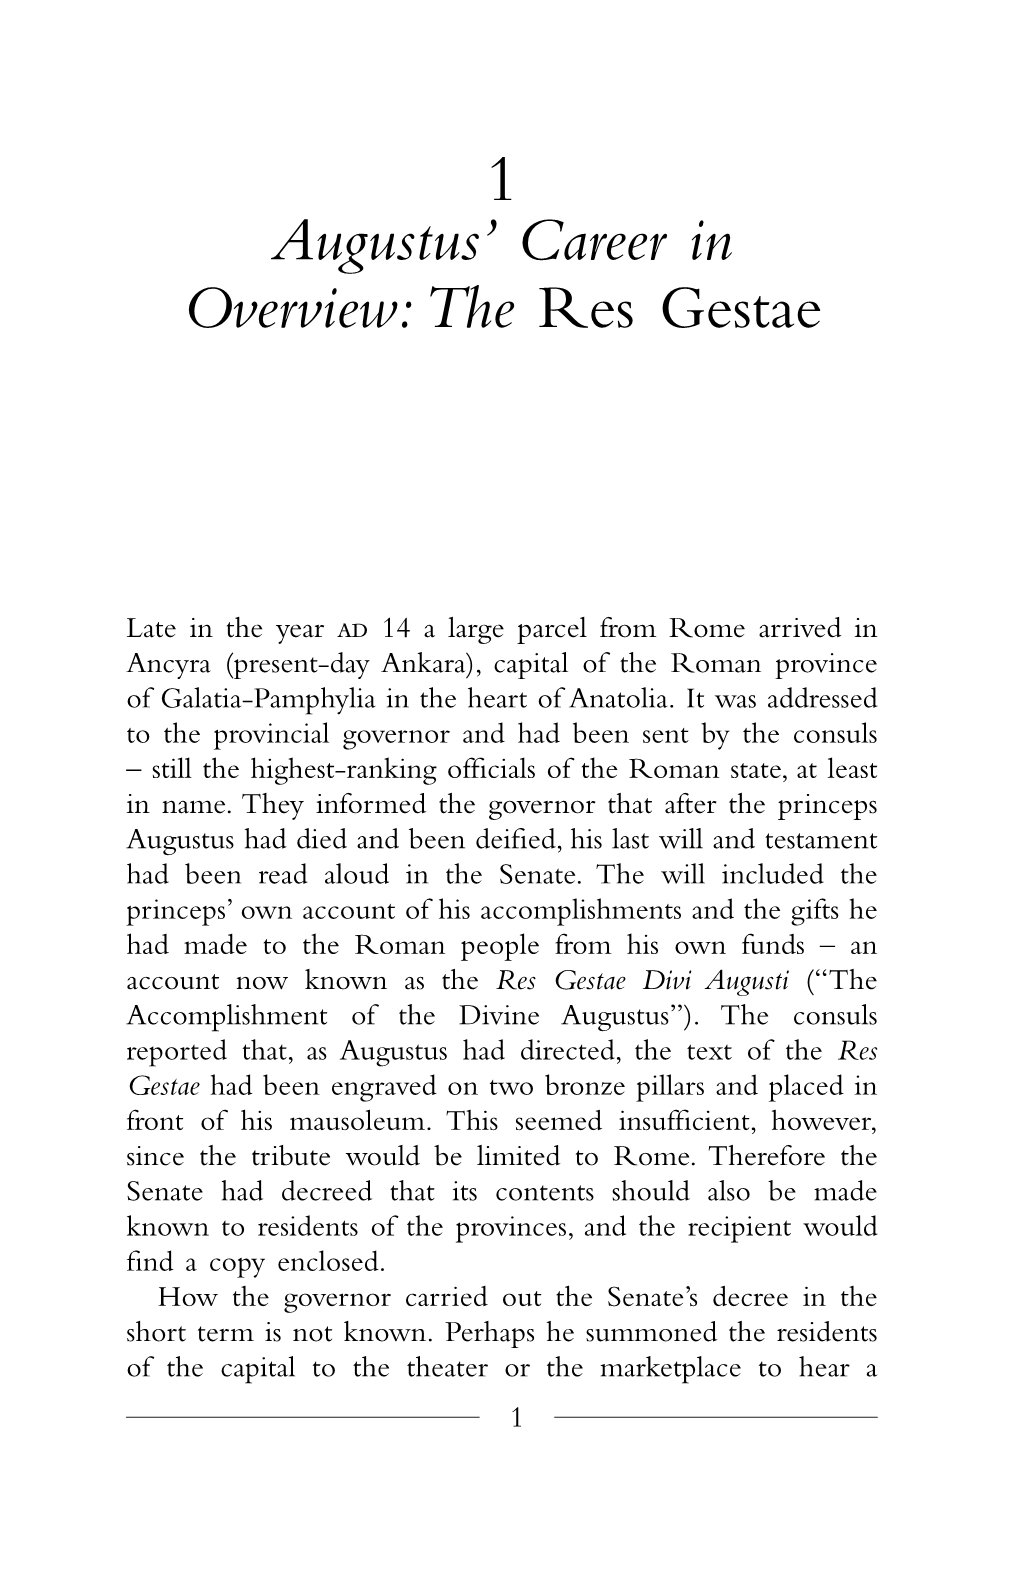 Augustus' Career in Overview: the Res Gestae